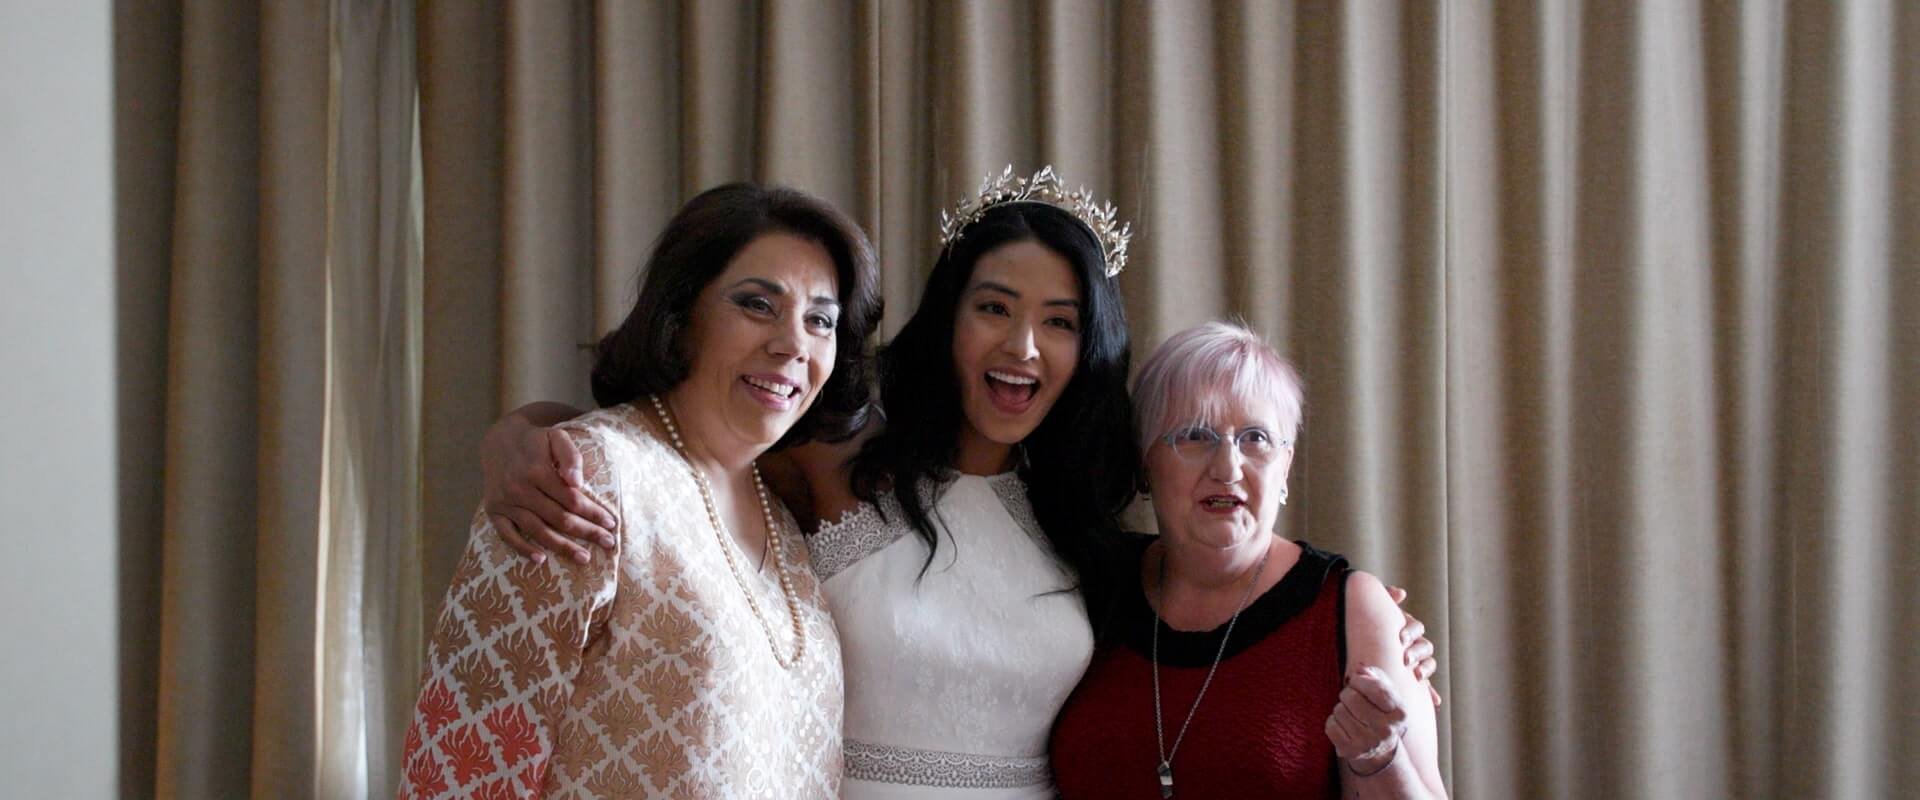 Rita and her closest family smile &amp; laugh for a photo before they leave for the wedding ceremony